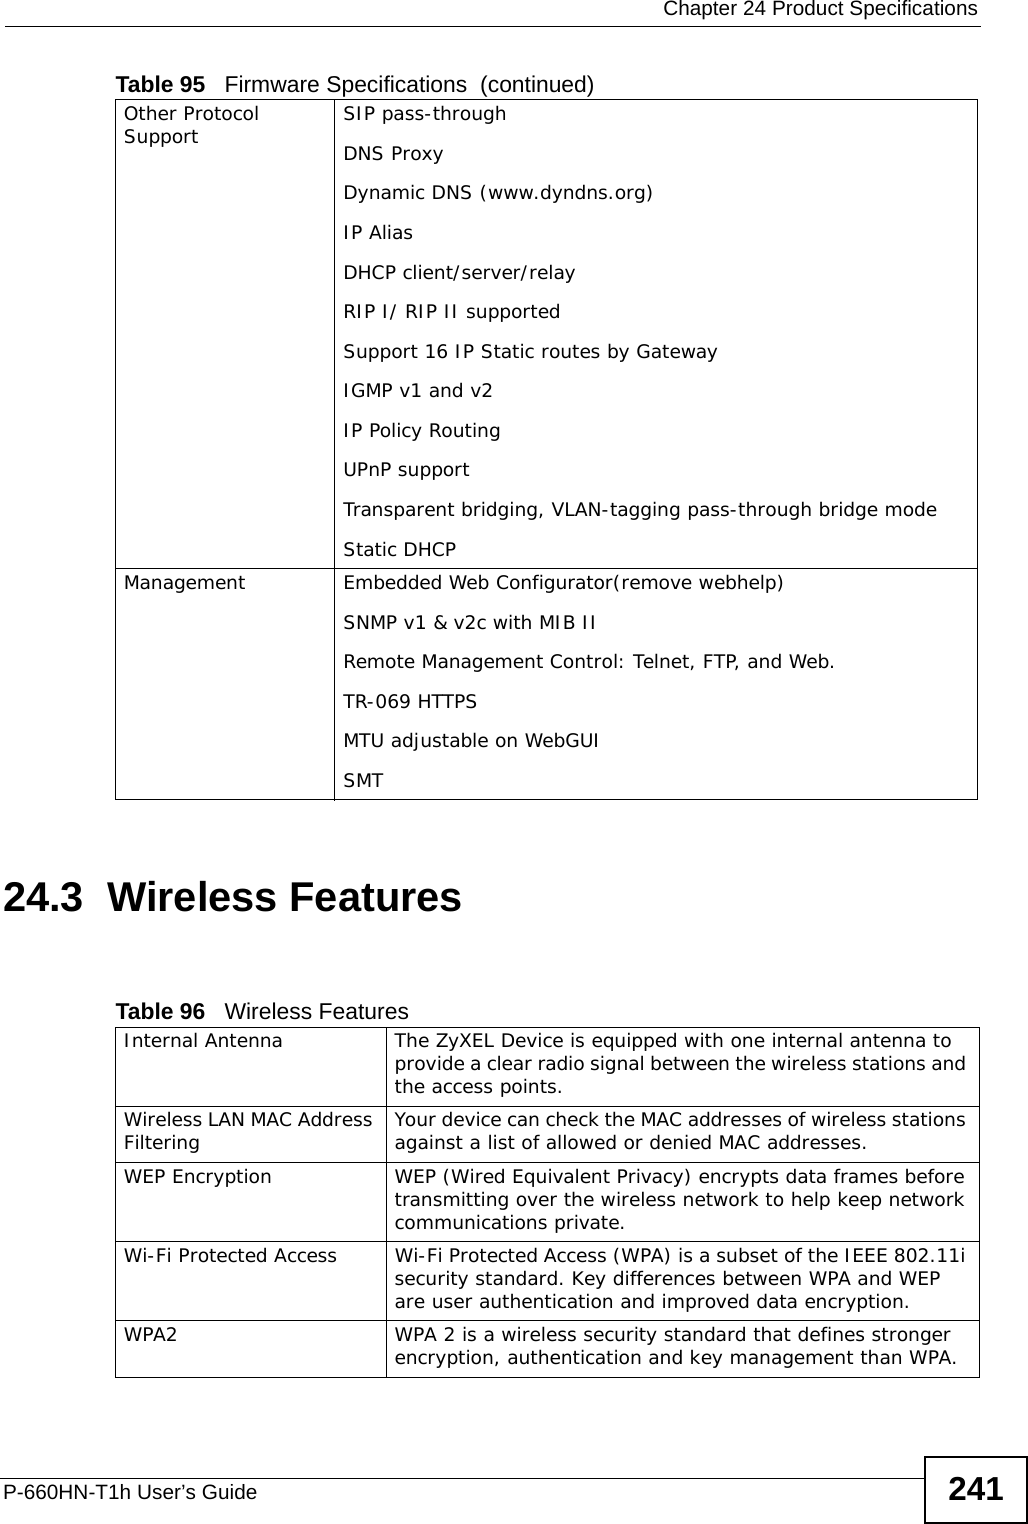  Chapter 24 Product SpecificationsP-660HN-T1h User’s Guide 24124.3  Wireless Features Other Protocol Support SIP pass-throughDNS ProxyDynamic DNS (www.dyndns.org)IP AliasDHCP client/server/relayRIP I/ RIP II supportedSupport 16 IP Static routes by GatewayIGMP v1 and v2 IP Policy RoutingUPnP support Transparent bridging, VLAN-tagging pass-through bridge modeStatic DHCPManagement Embedded Web Configurator(remove webhelp)SNMP v1 &amp; v2c with MIB IIRemote Management Control: Telnet, FTP, and Web.TR-069 HTTPSMTU adjustable on WebGUISMTTable 95   Firmware Specifications  (continued)Table 96   Wireless FeaturesInternal Antenna  The ZyXEL Device is equipped with one internal antenna to provide a clear radio signal between the wireless stations and the access points.Wireless LAN MAC Address Filtering  Your device can check the MAC addresses of wireless stations against a list of allowed or denied MAC addresses.WEP Encryption WEP (Wired Equivalent Privacy) encrypts data frames before transmitting over the wireless network to help keep network communications private.Wi-Fi Protected Access  Wi-Fi Protected Access (WPA) is a subset of the IEEE 802.11i security standard. Key differences between WPA and WEP are user authentication and improved data encryption.WPA2  WPA 2 is a wireless security standard that defines stronger encryption, authentication and key management than WPA.